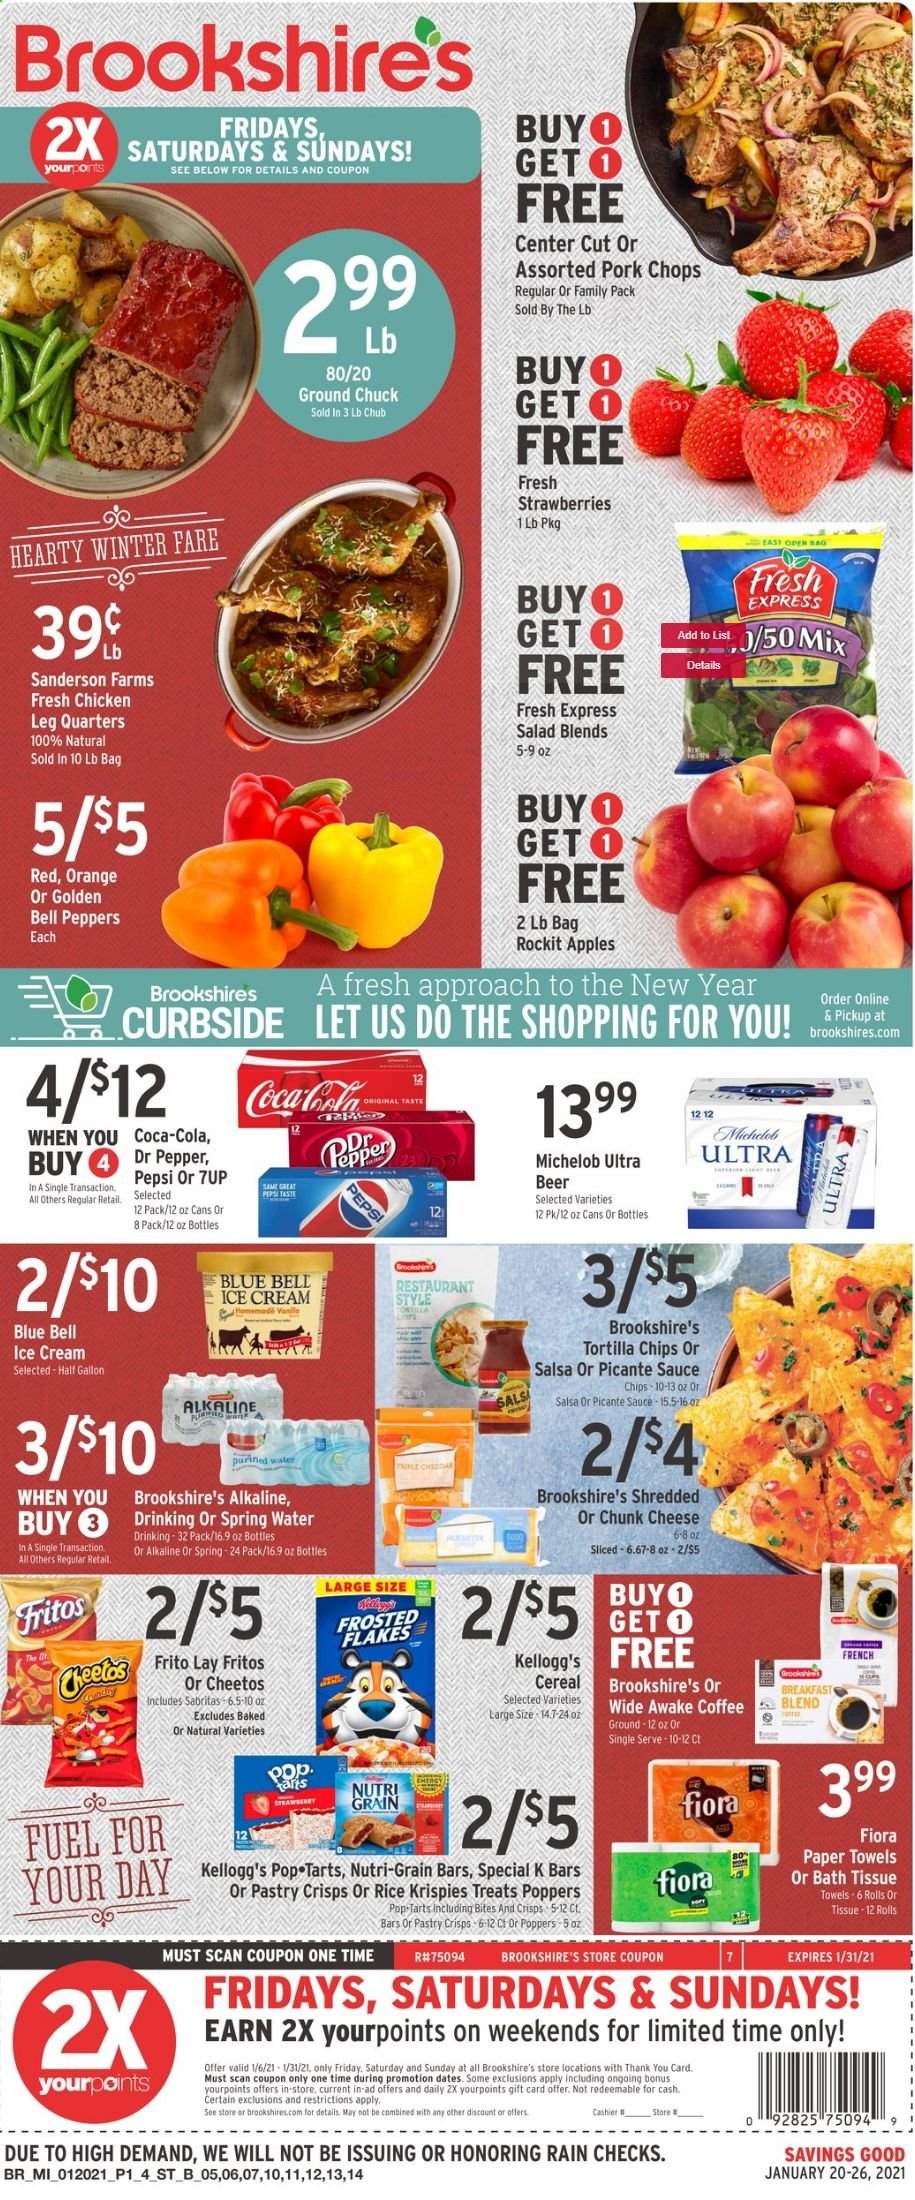 thumbnail - Brookshires Flyer - 01/20/2021 - 01/26/2021 - Sales products - Michelob, bell peppers, apples, oranges, salad, sauce, cheese, chunk cheese, salsa, ice cream, Blue Bell, strawberries, Kellogg's, Pop-Tarts, Nutri-Grain bars, tortilla chips, Cheetos, chips, cereals, Fritos, Rice Krispies, Frosted Flakes, Nutri-Grain, dried dates, Coca-Cola, Pepsi, Dr. Pepper, 7UP, spring water, coffee, breakfast blend, beer, ground chuck, pork chops, pork meat, bath tissue, kitchen towels, paper towels. Page 1.